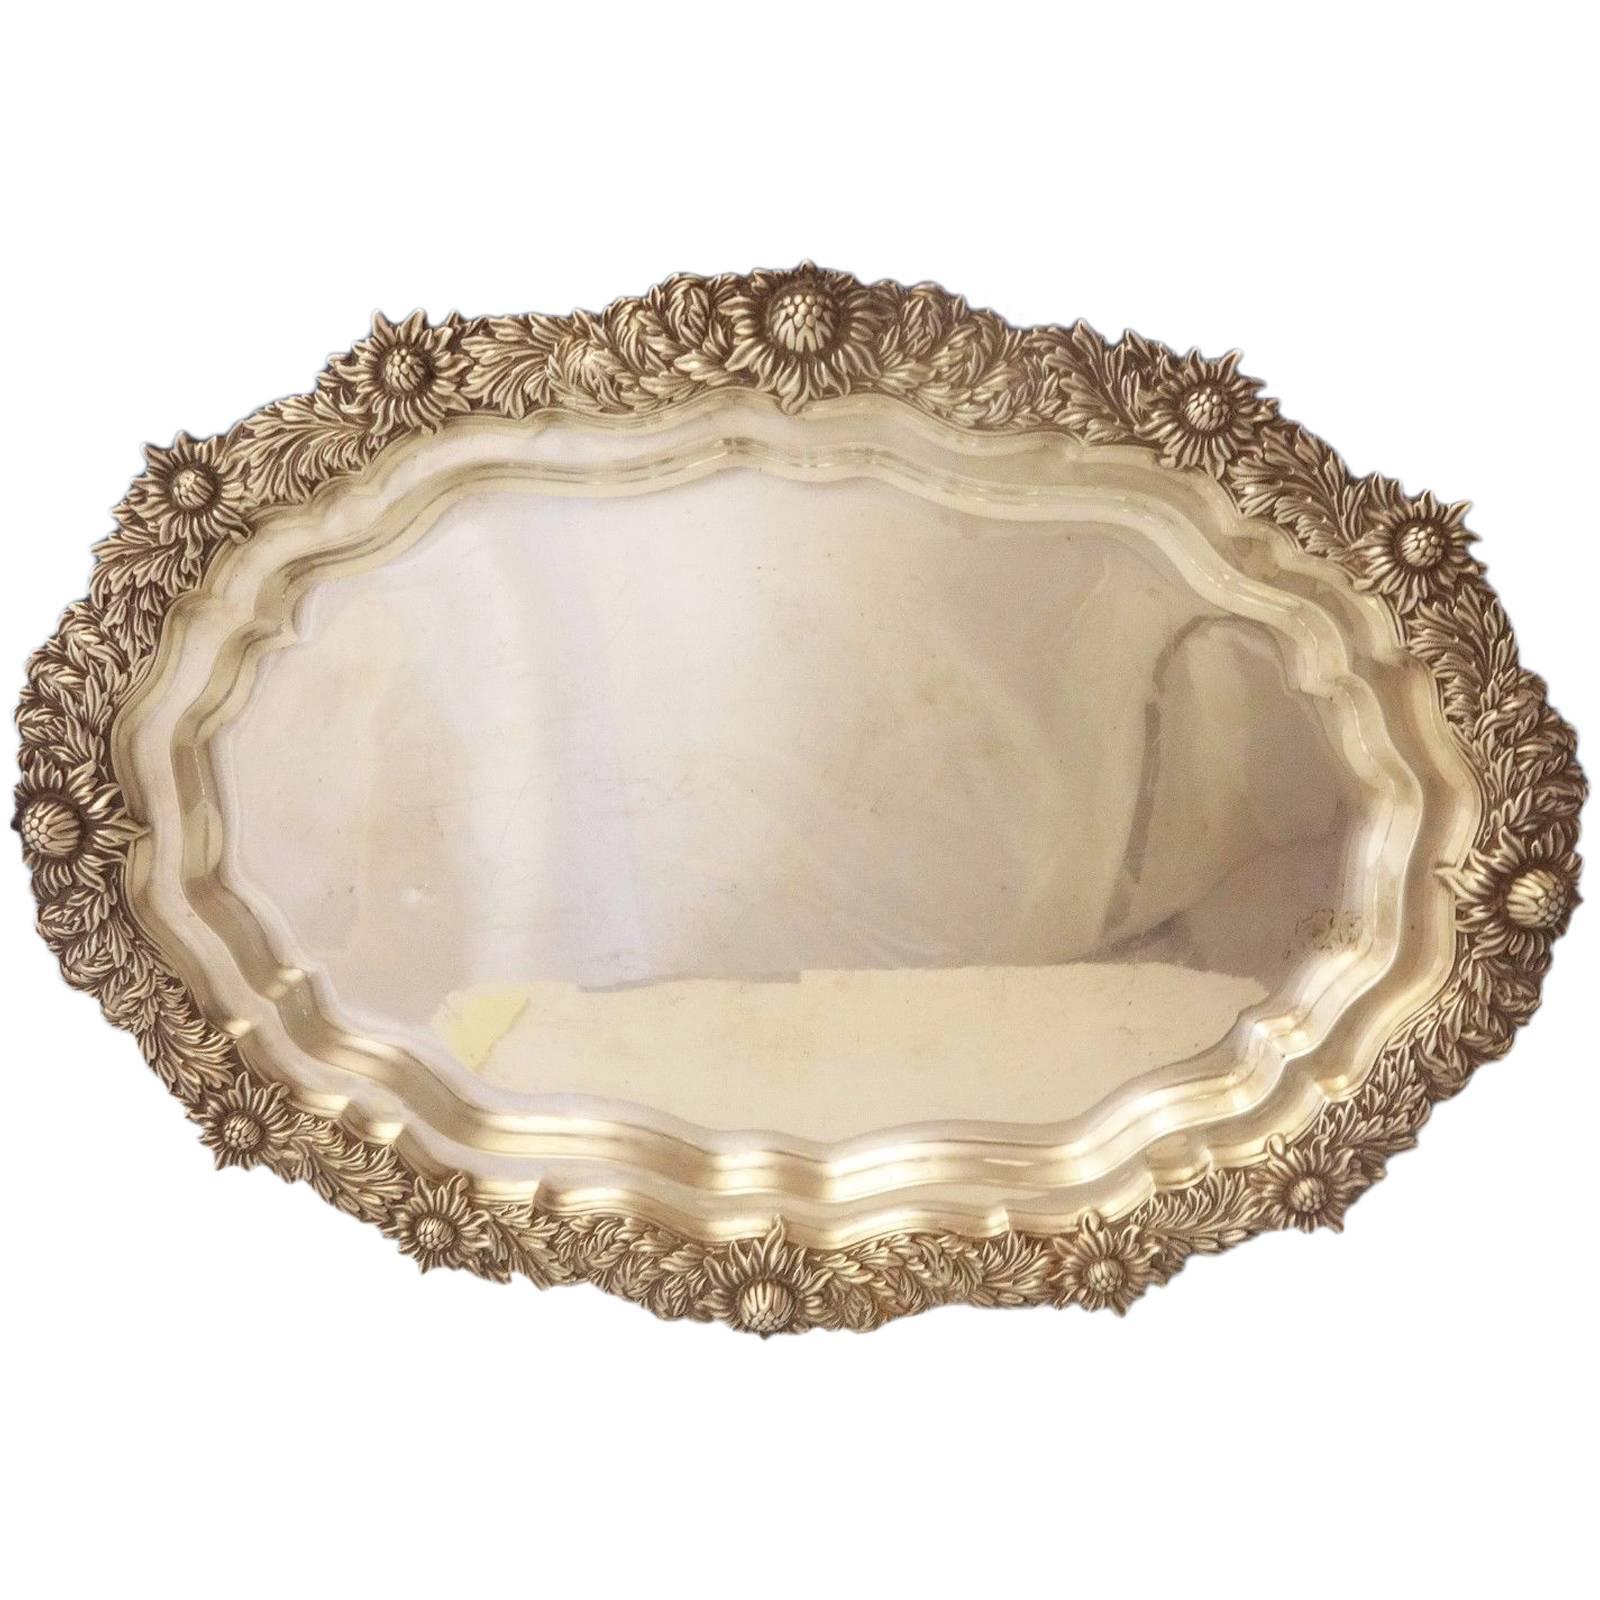 Chrysanthemum by Tiffany & Co. Sterling Silver Oval Tray